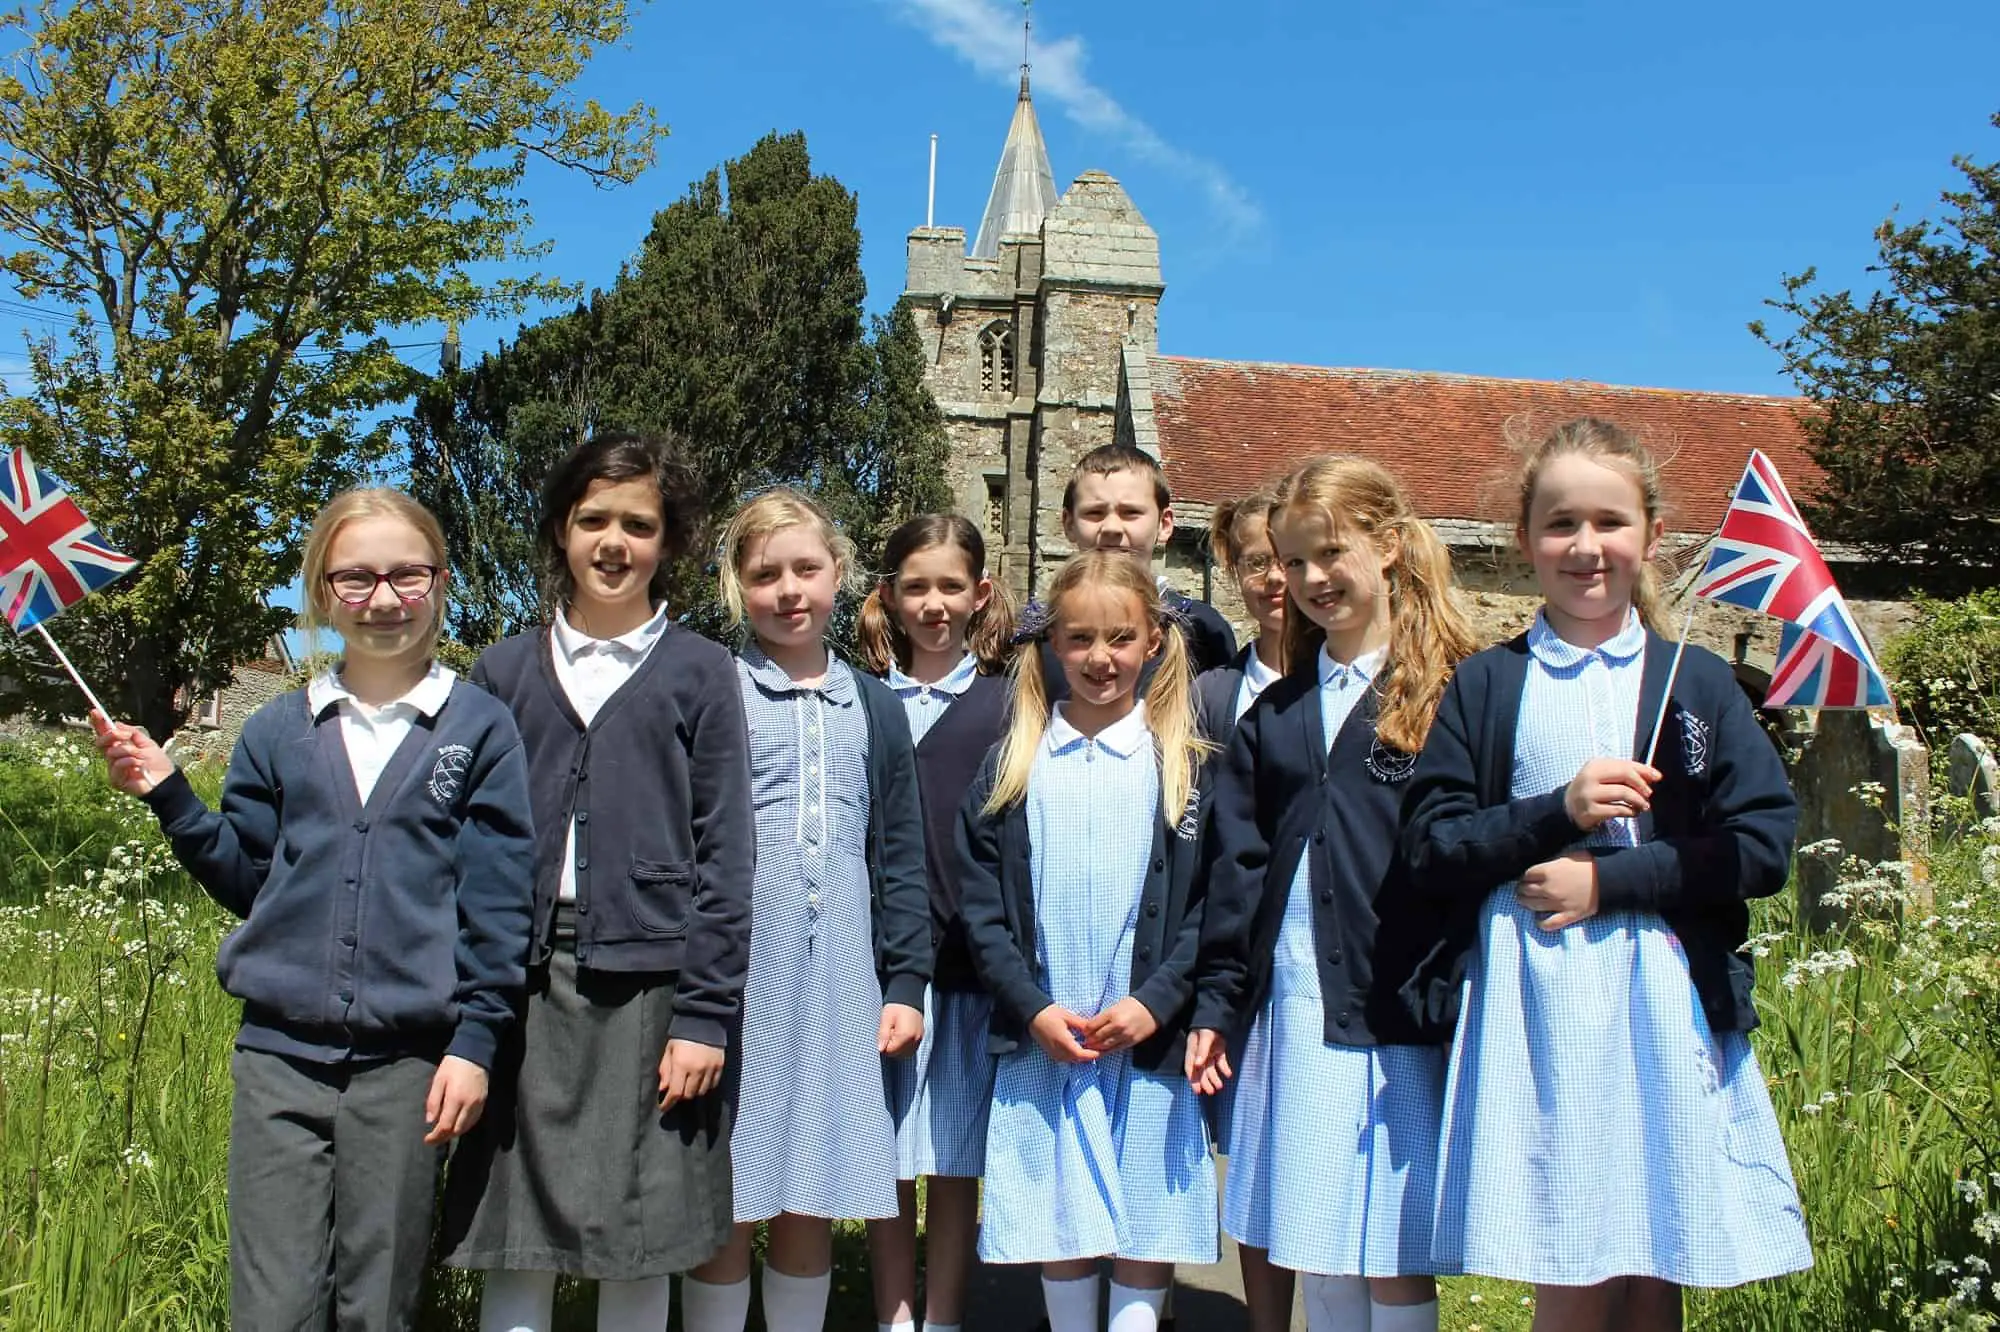 Bell ringers from Brighstone CE Aided Primary School